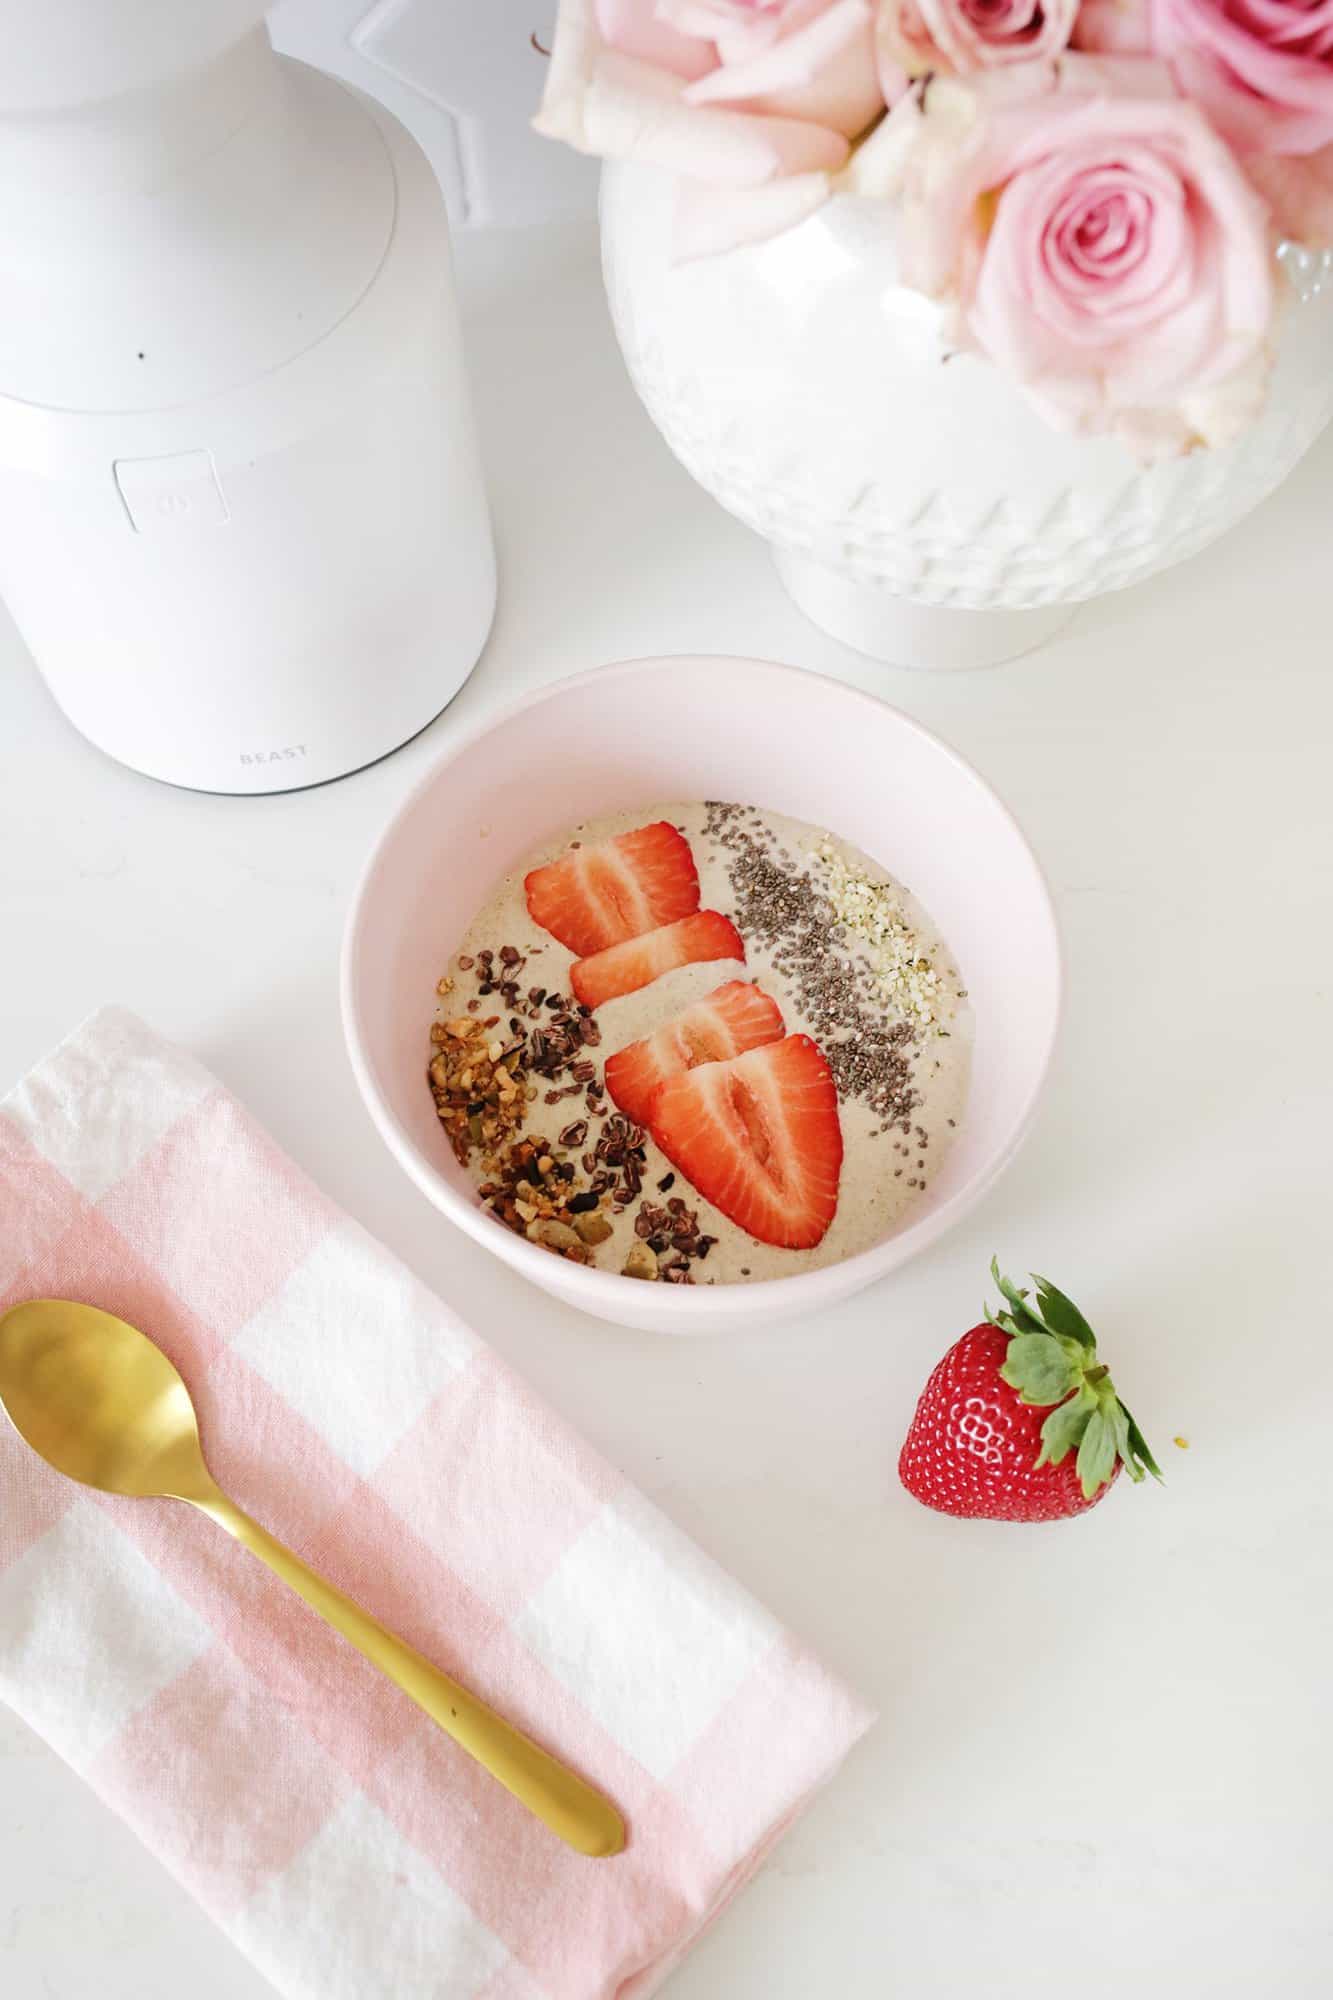 Strawberry smoothie bowl in front of the blender